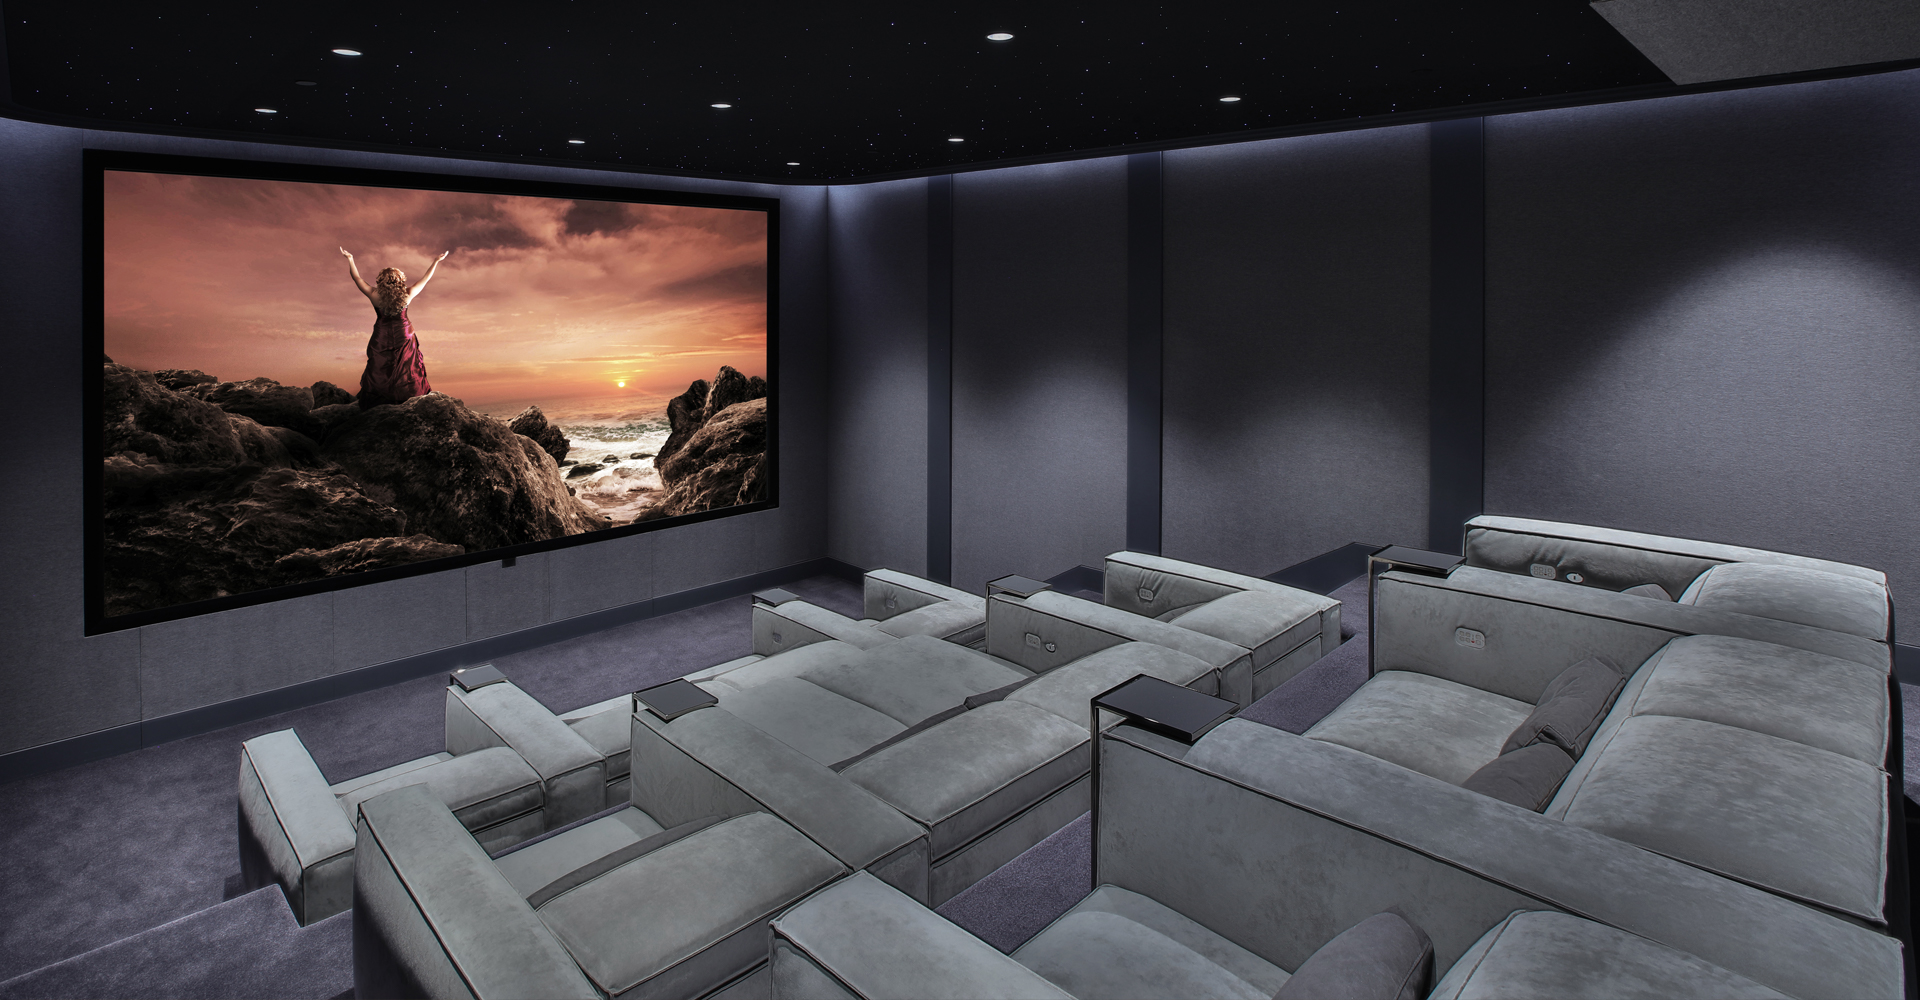 Cineak – CINEAK home theater and private cinema seating